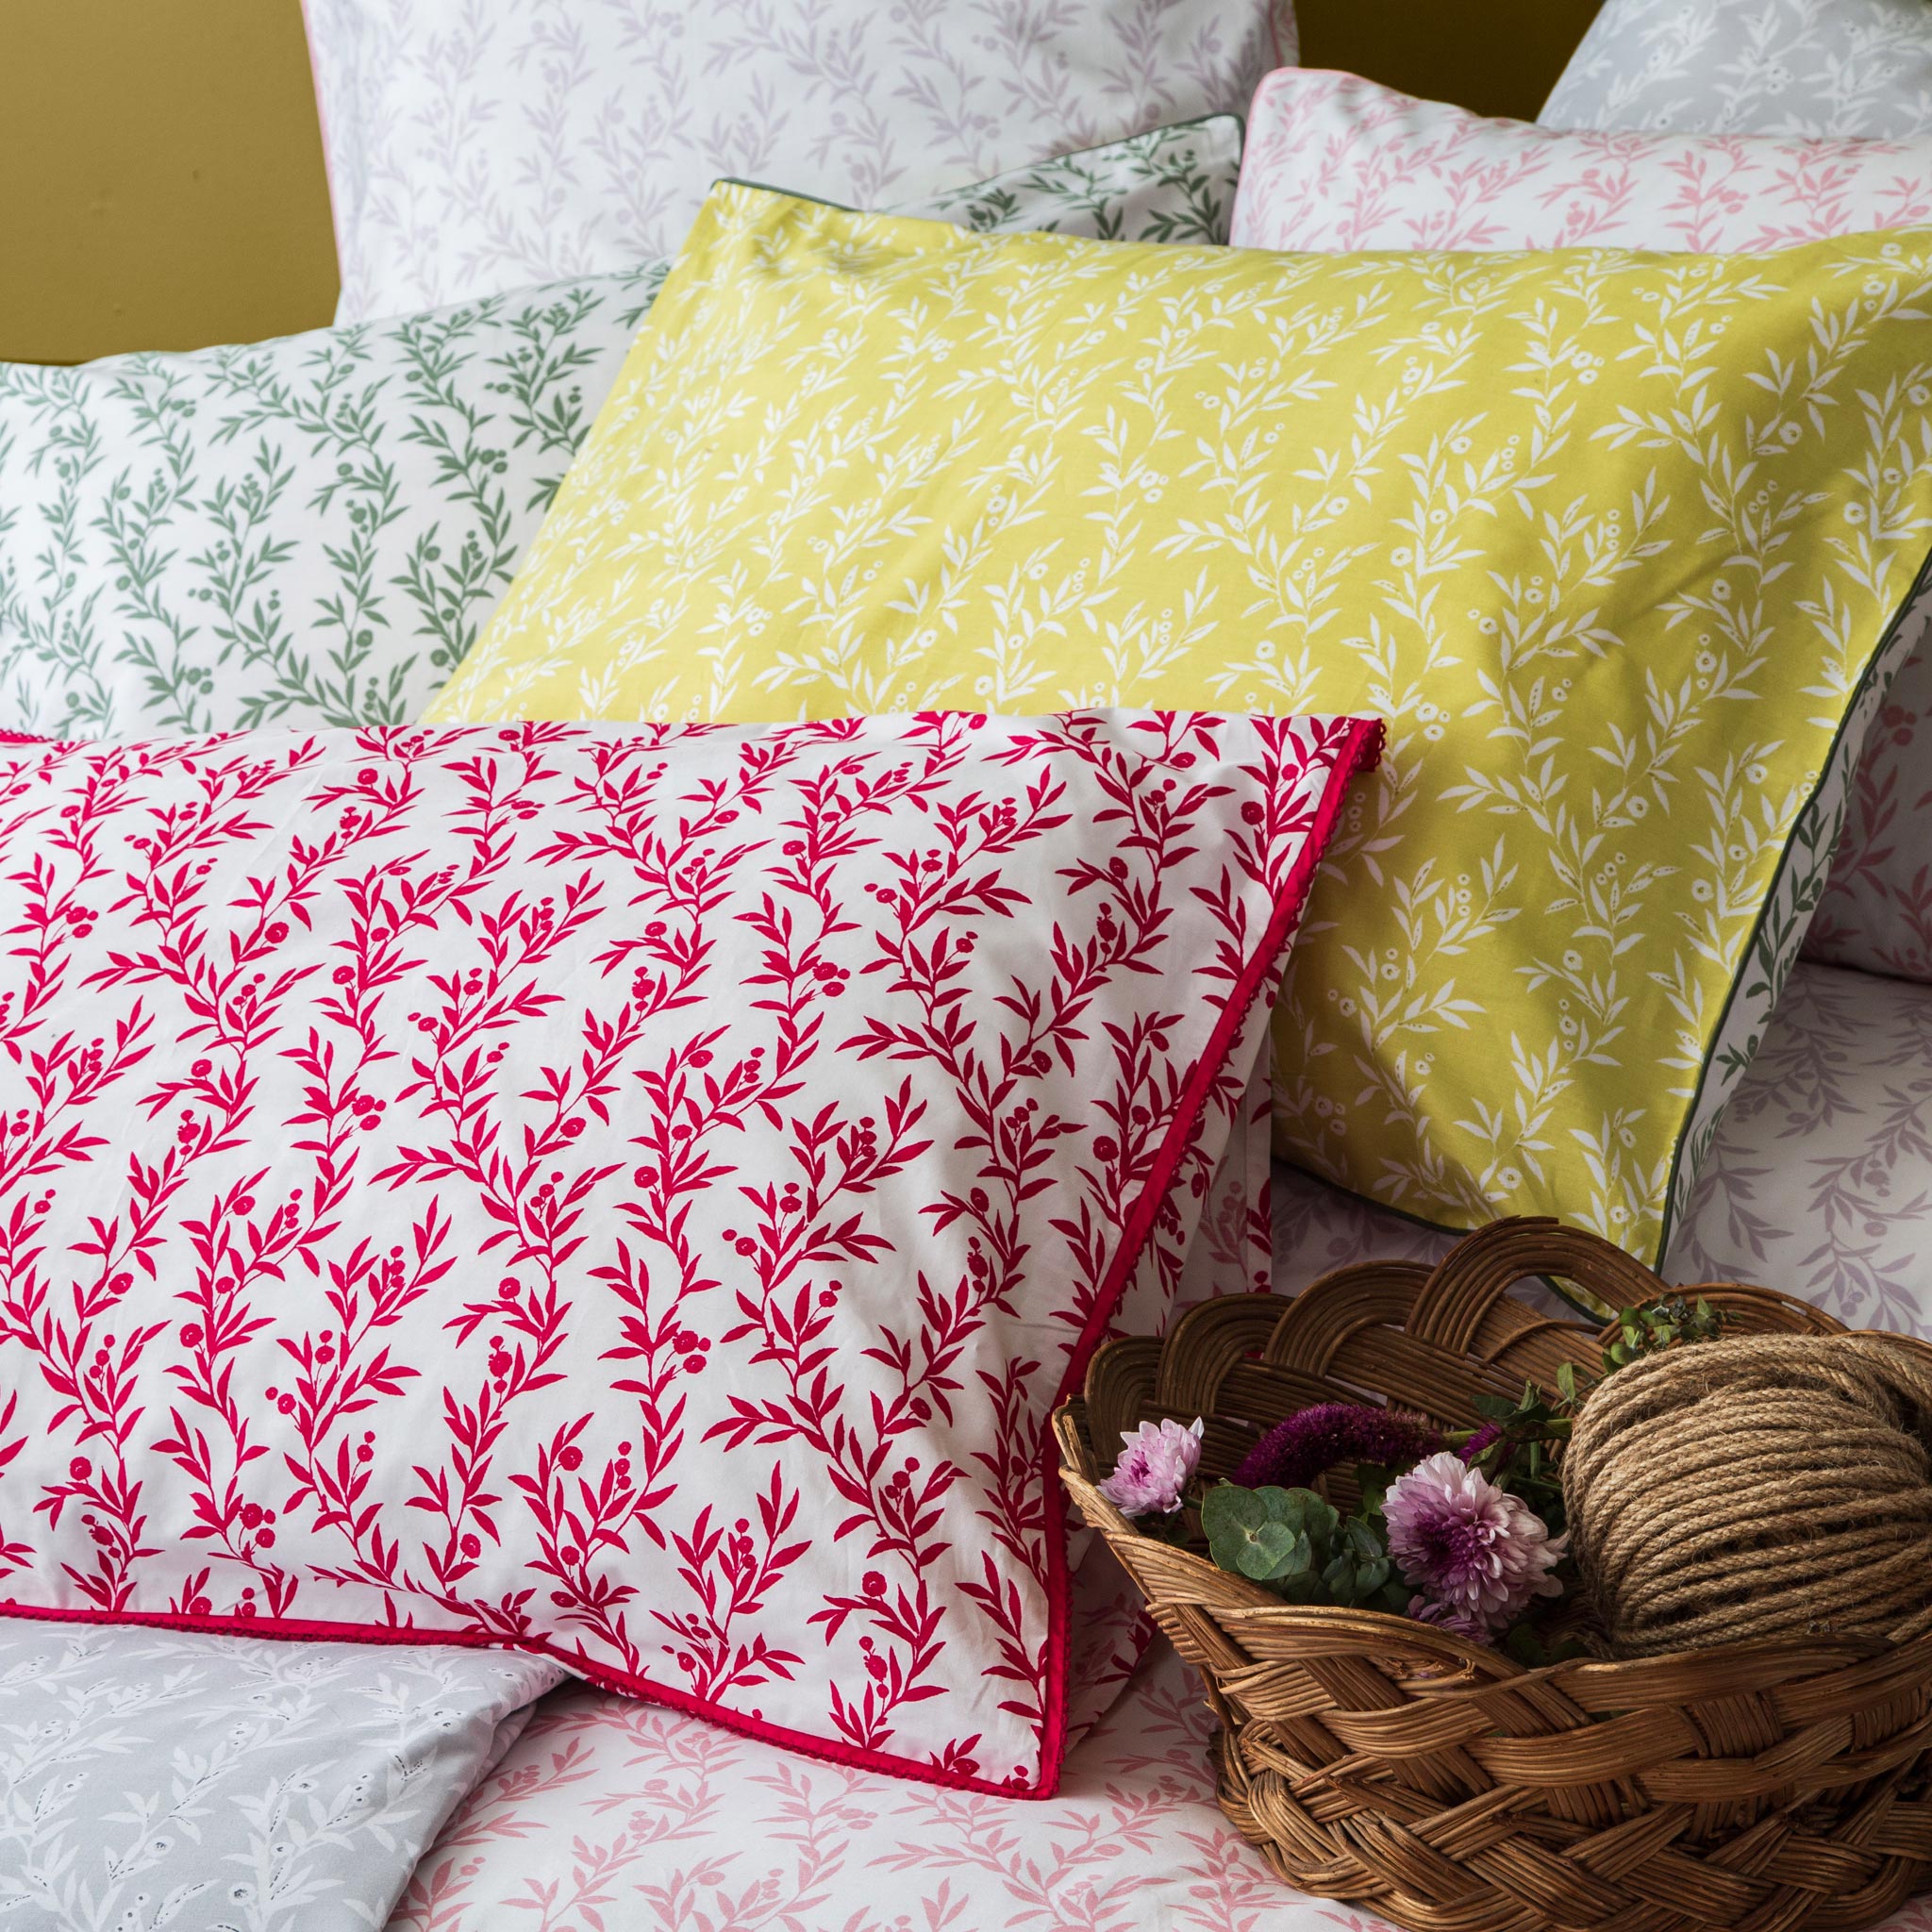 Pure Luxury Percale Bedding Pewter Grey, Olive Green & Yellow, Lilac & Pink, Viva Magenta Ditsy Floral Duvet Cover Set